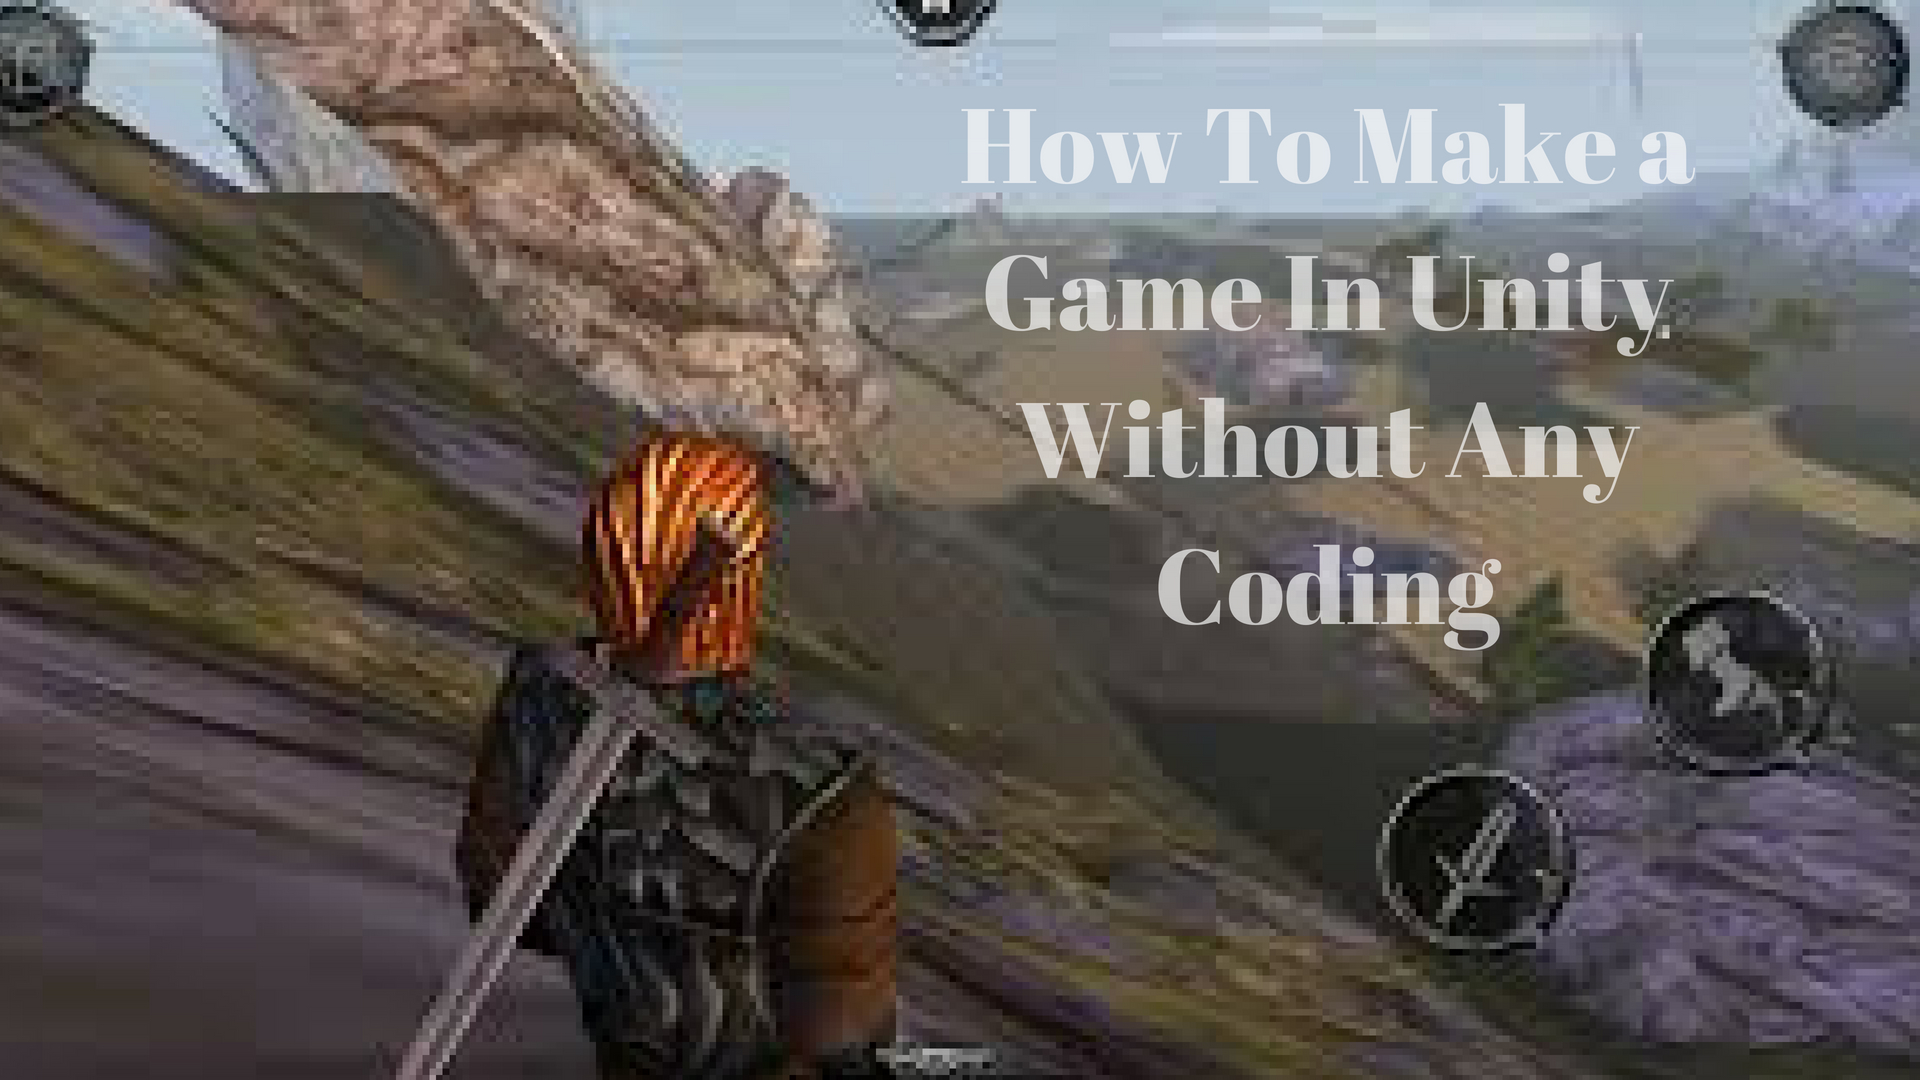 How To Make a Game In Unity Without Any Coding